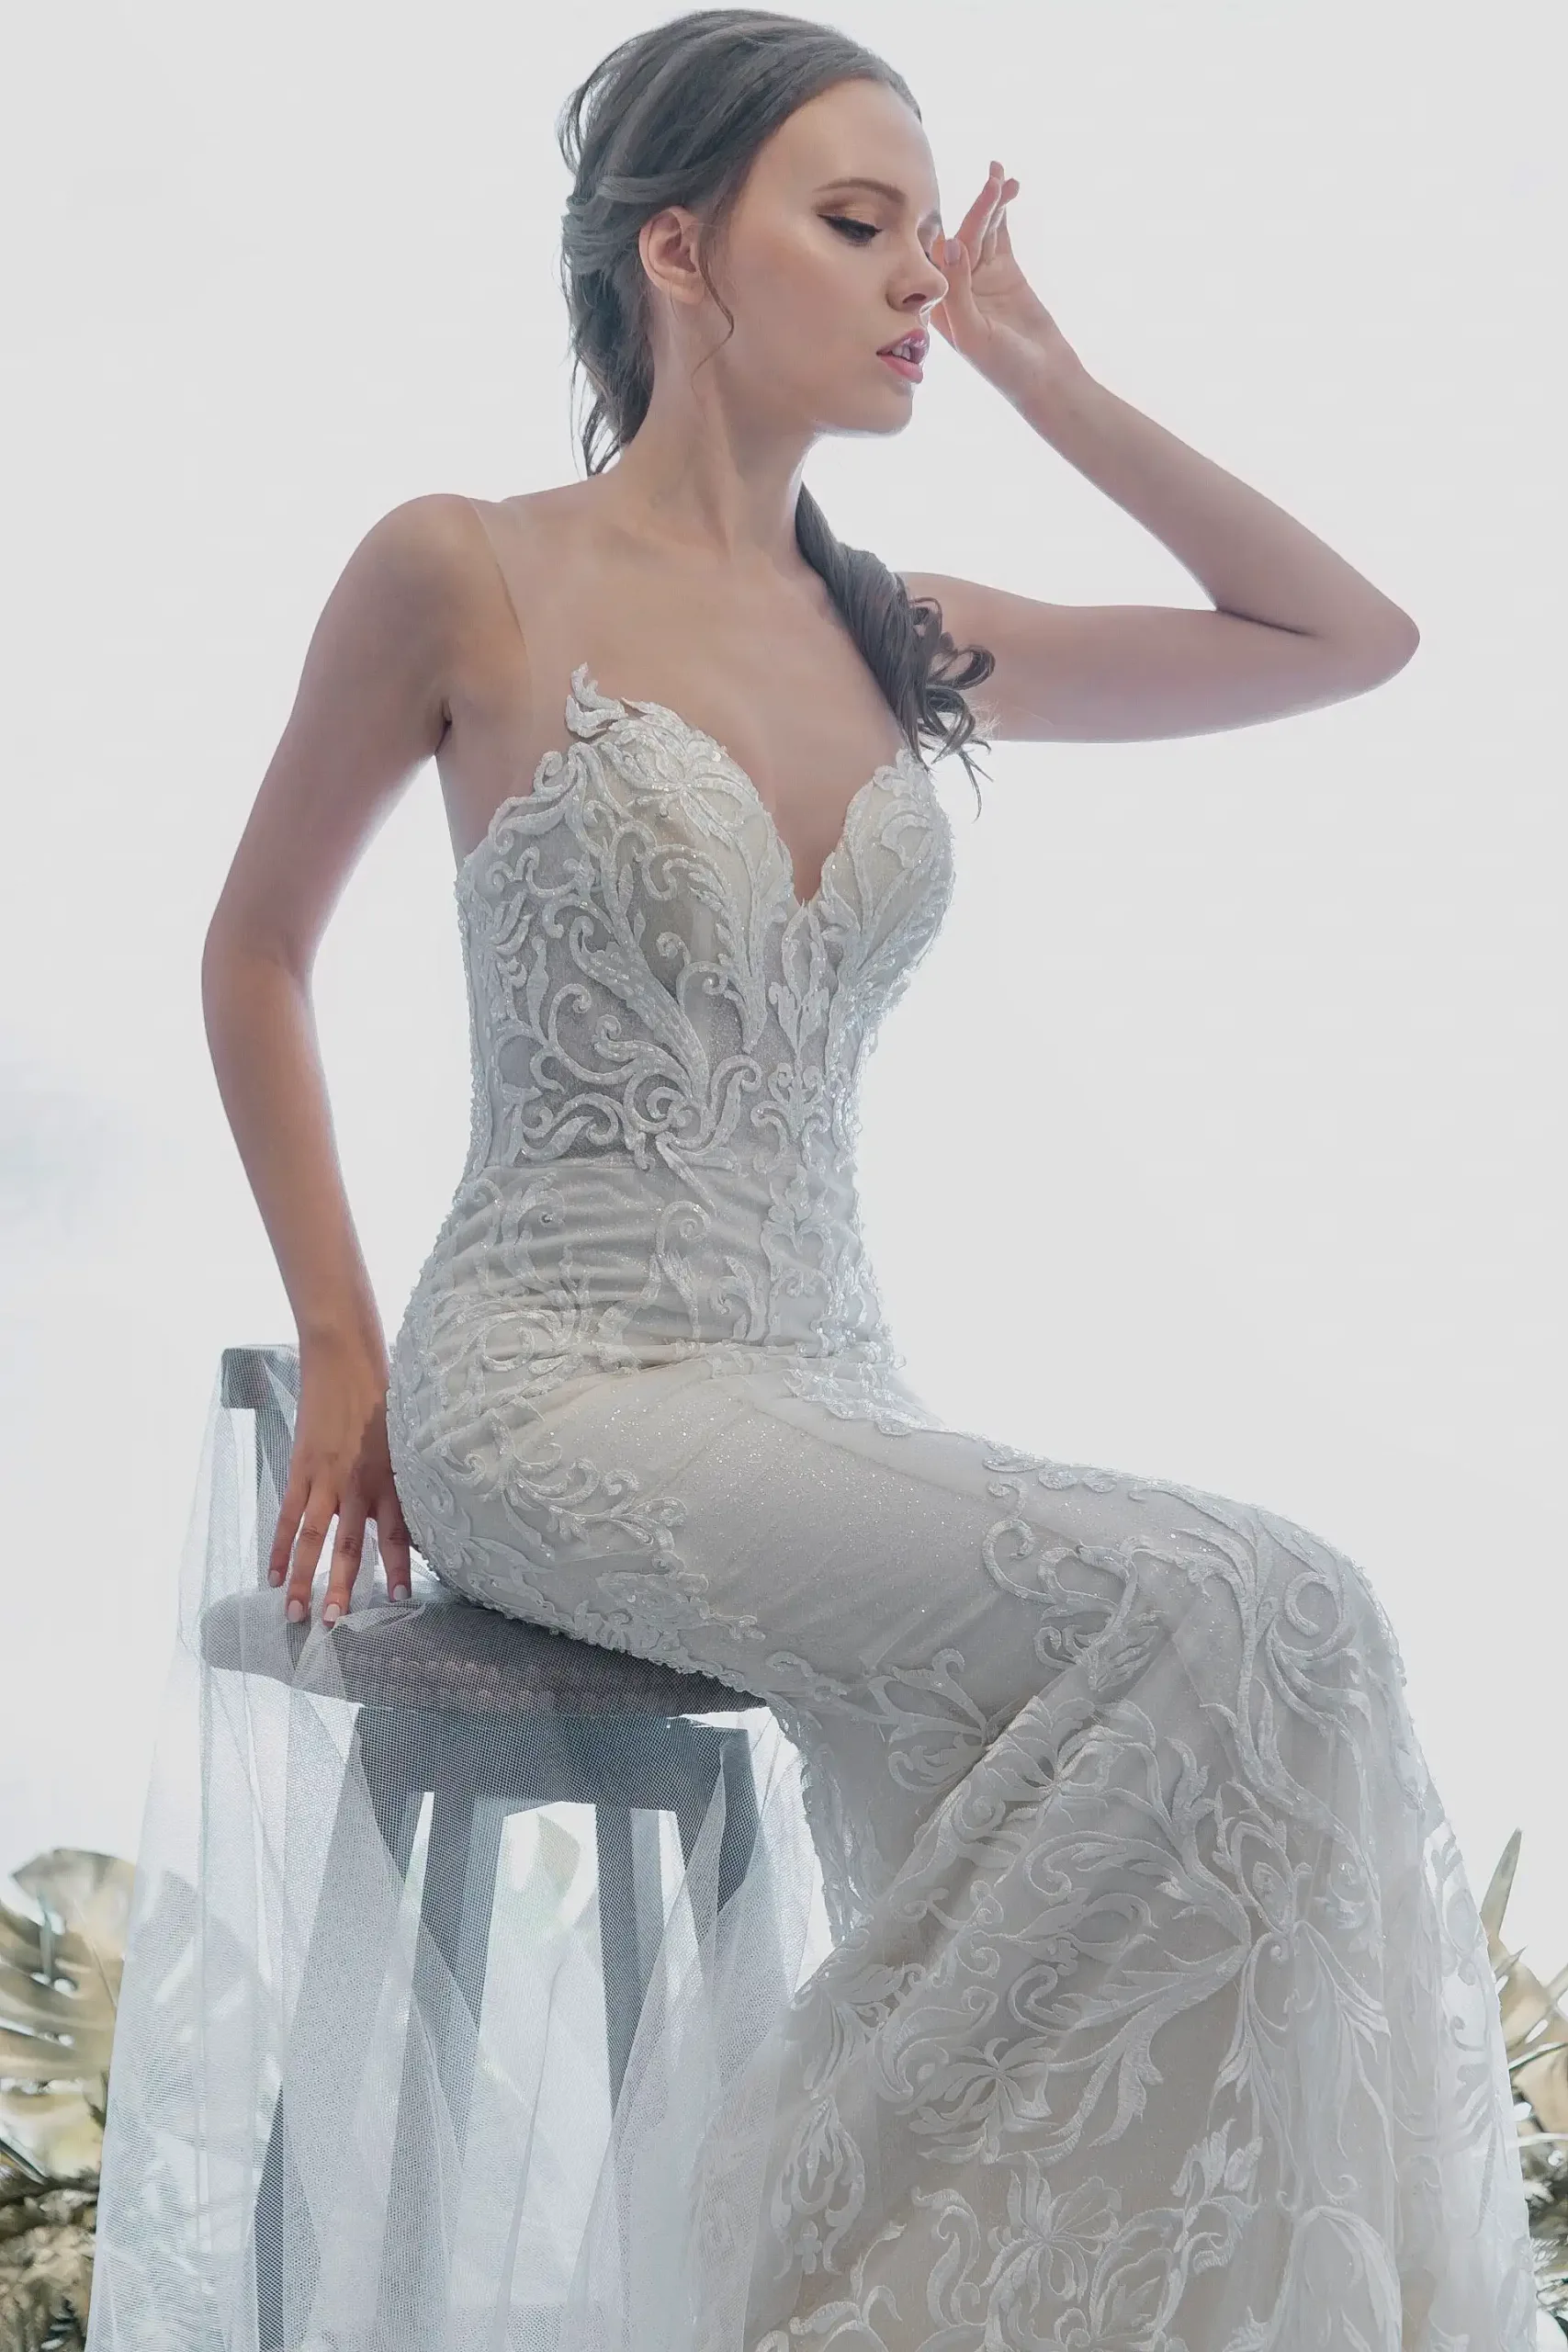 perfect wedding gown